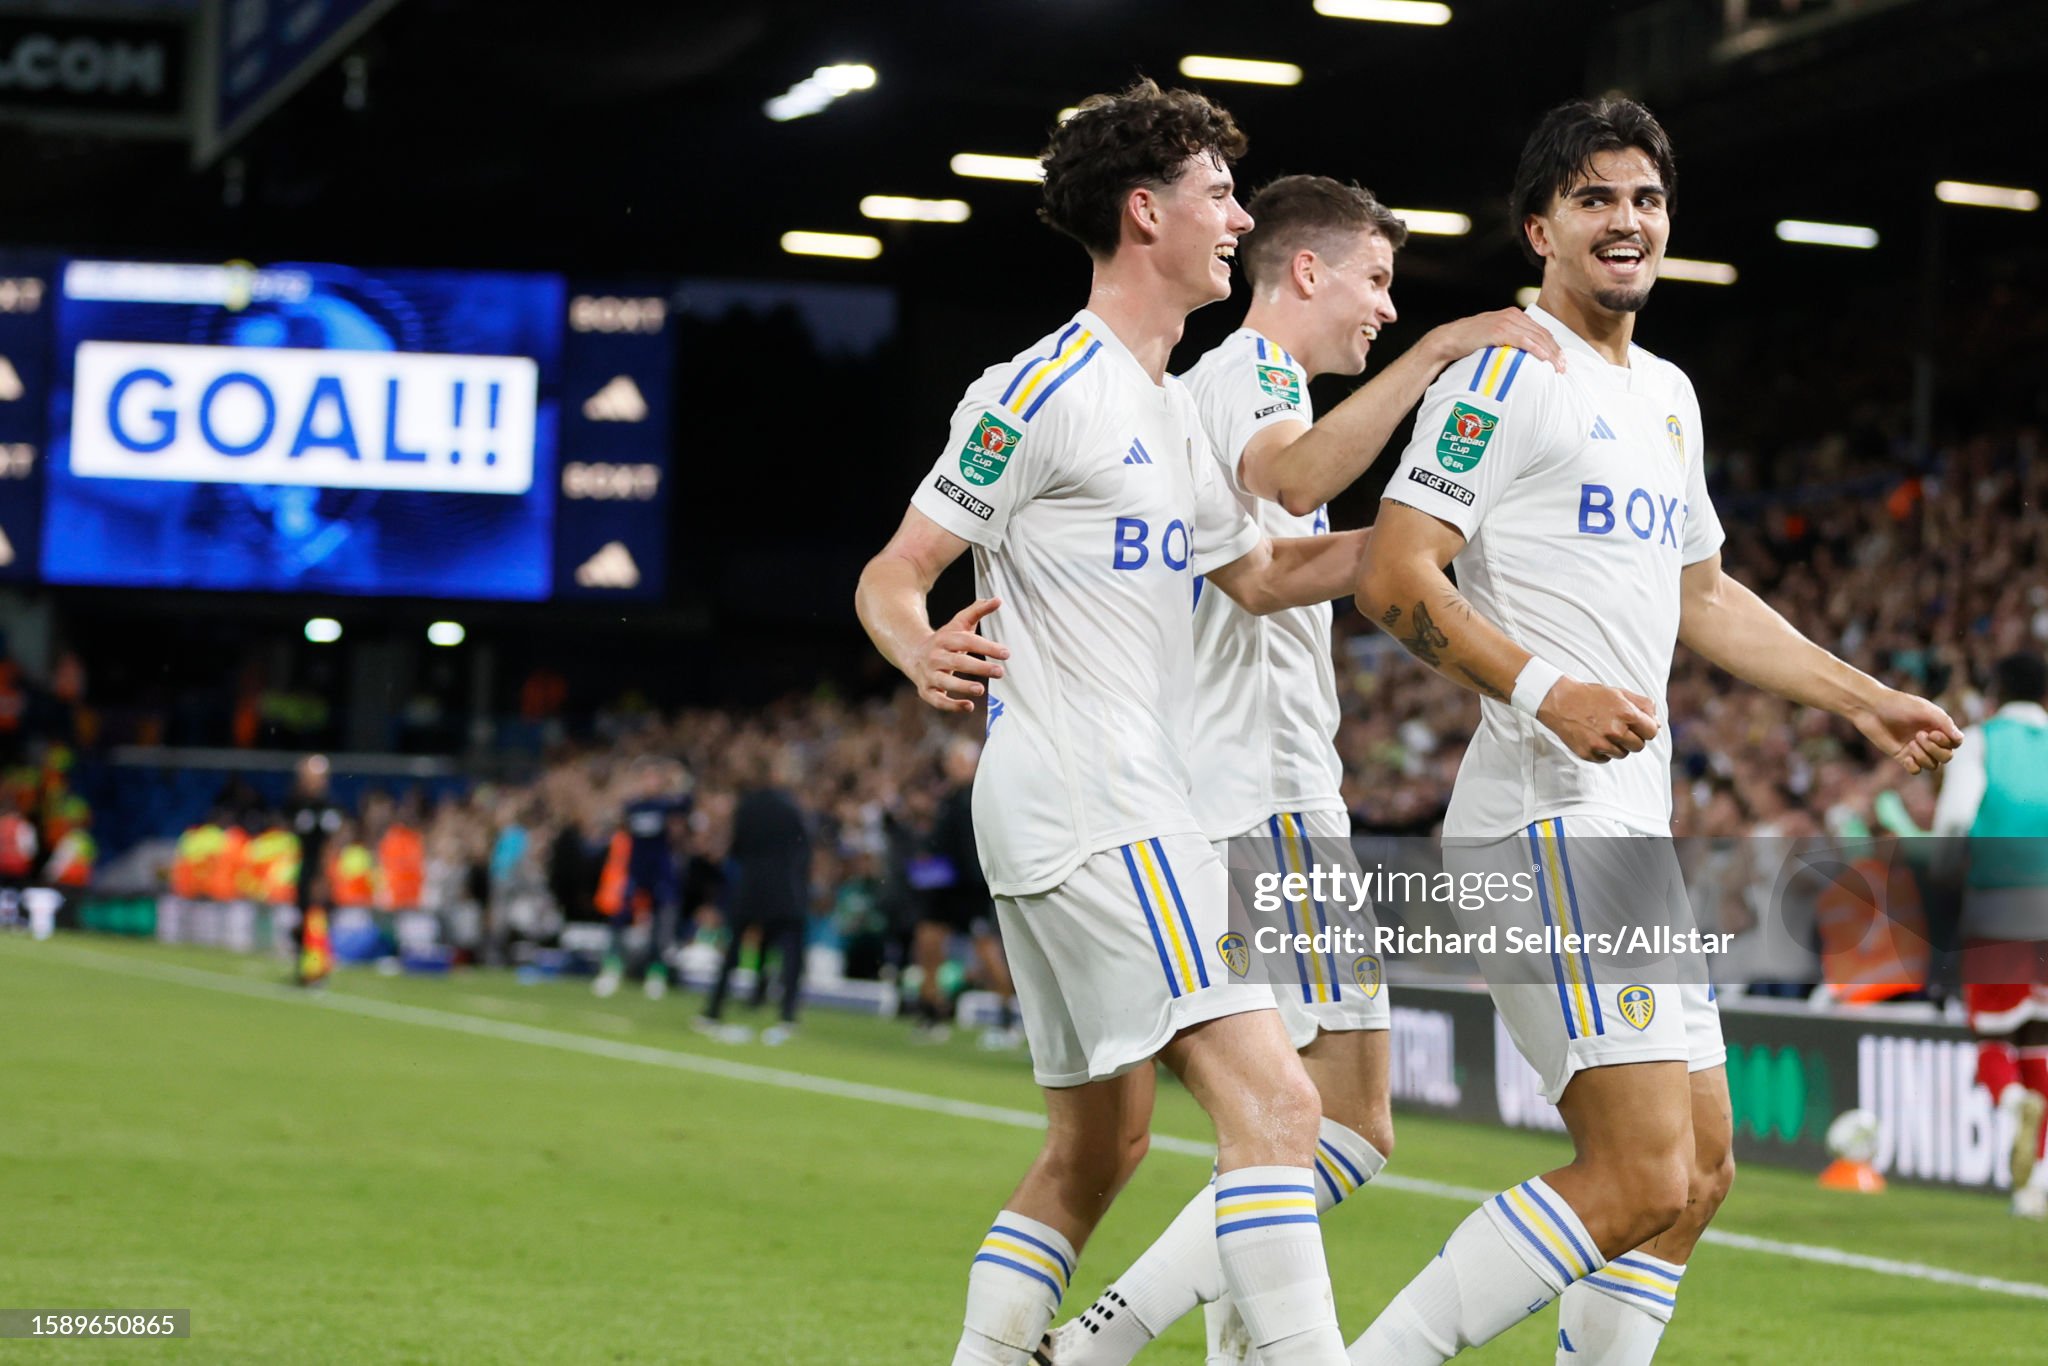 Top clubs take note: Leeds United lowers price tag for potential Dutch national team player